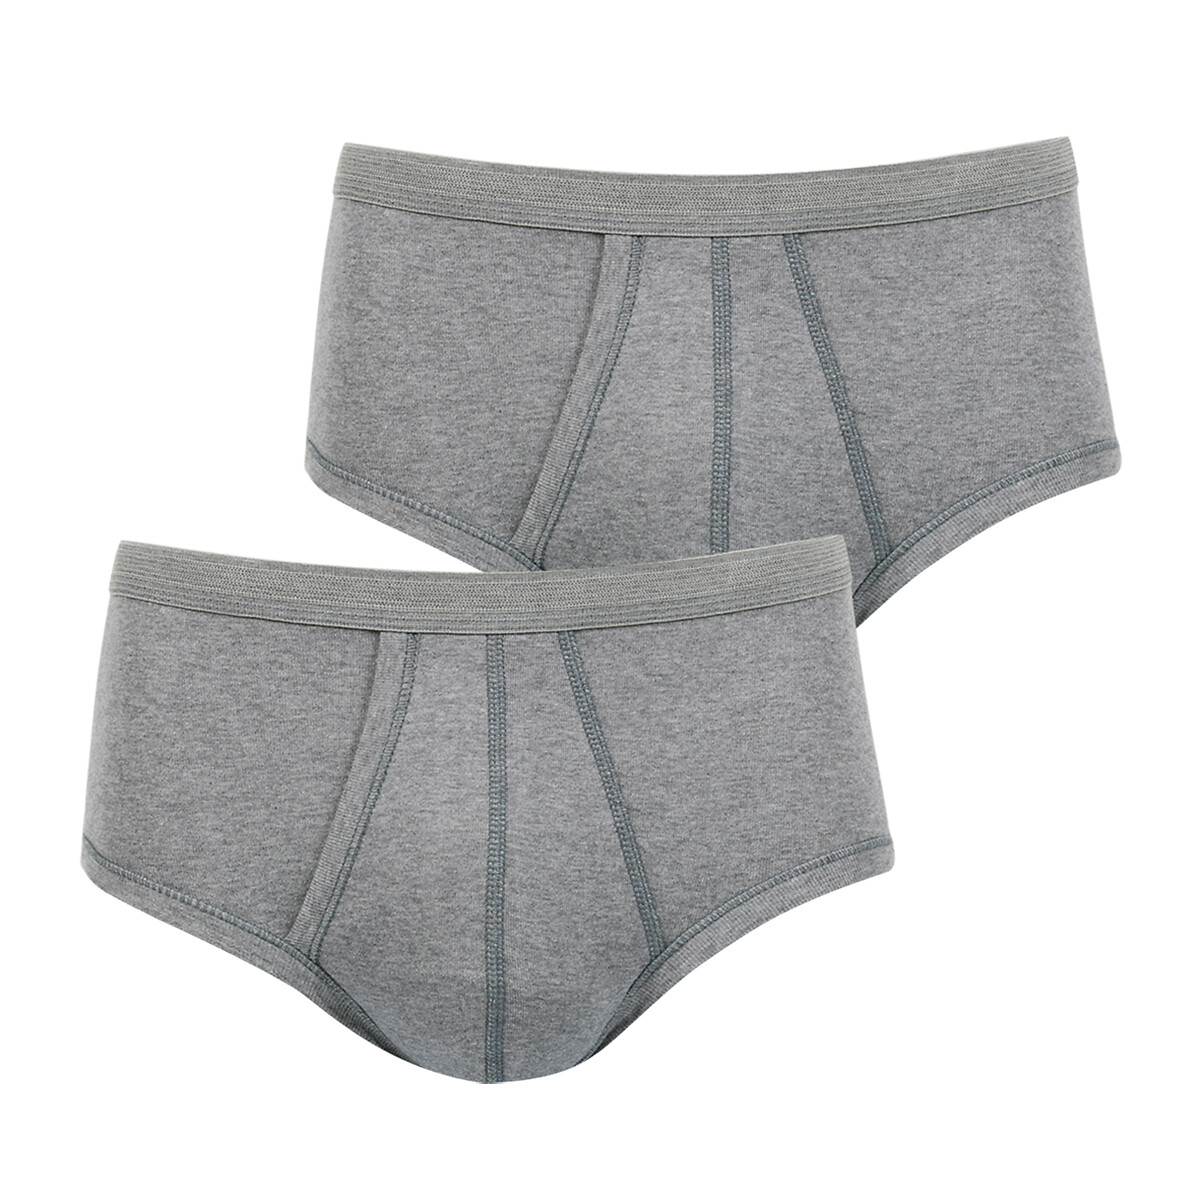 Image of Pack of 2 Heritage Crotchless Briefs in Cotton with High Waist